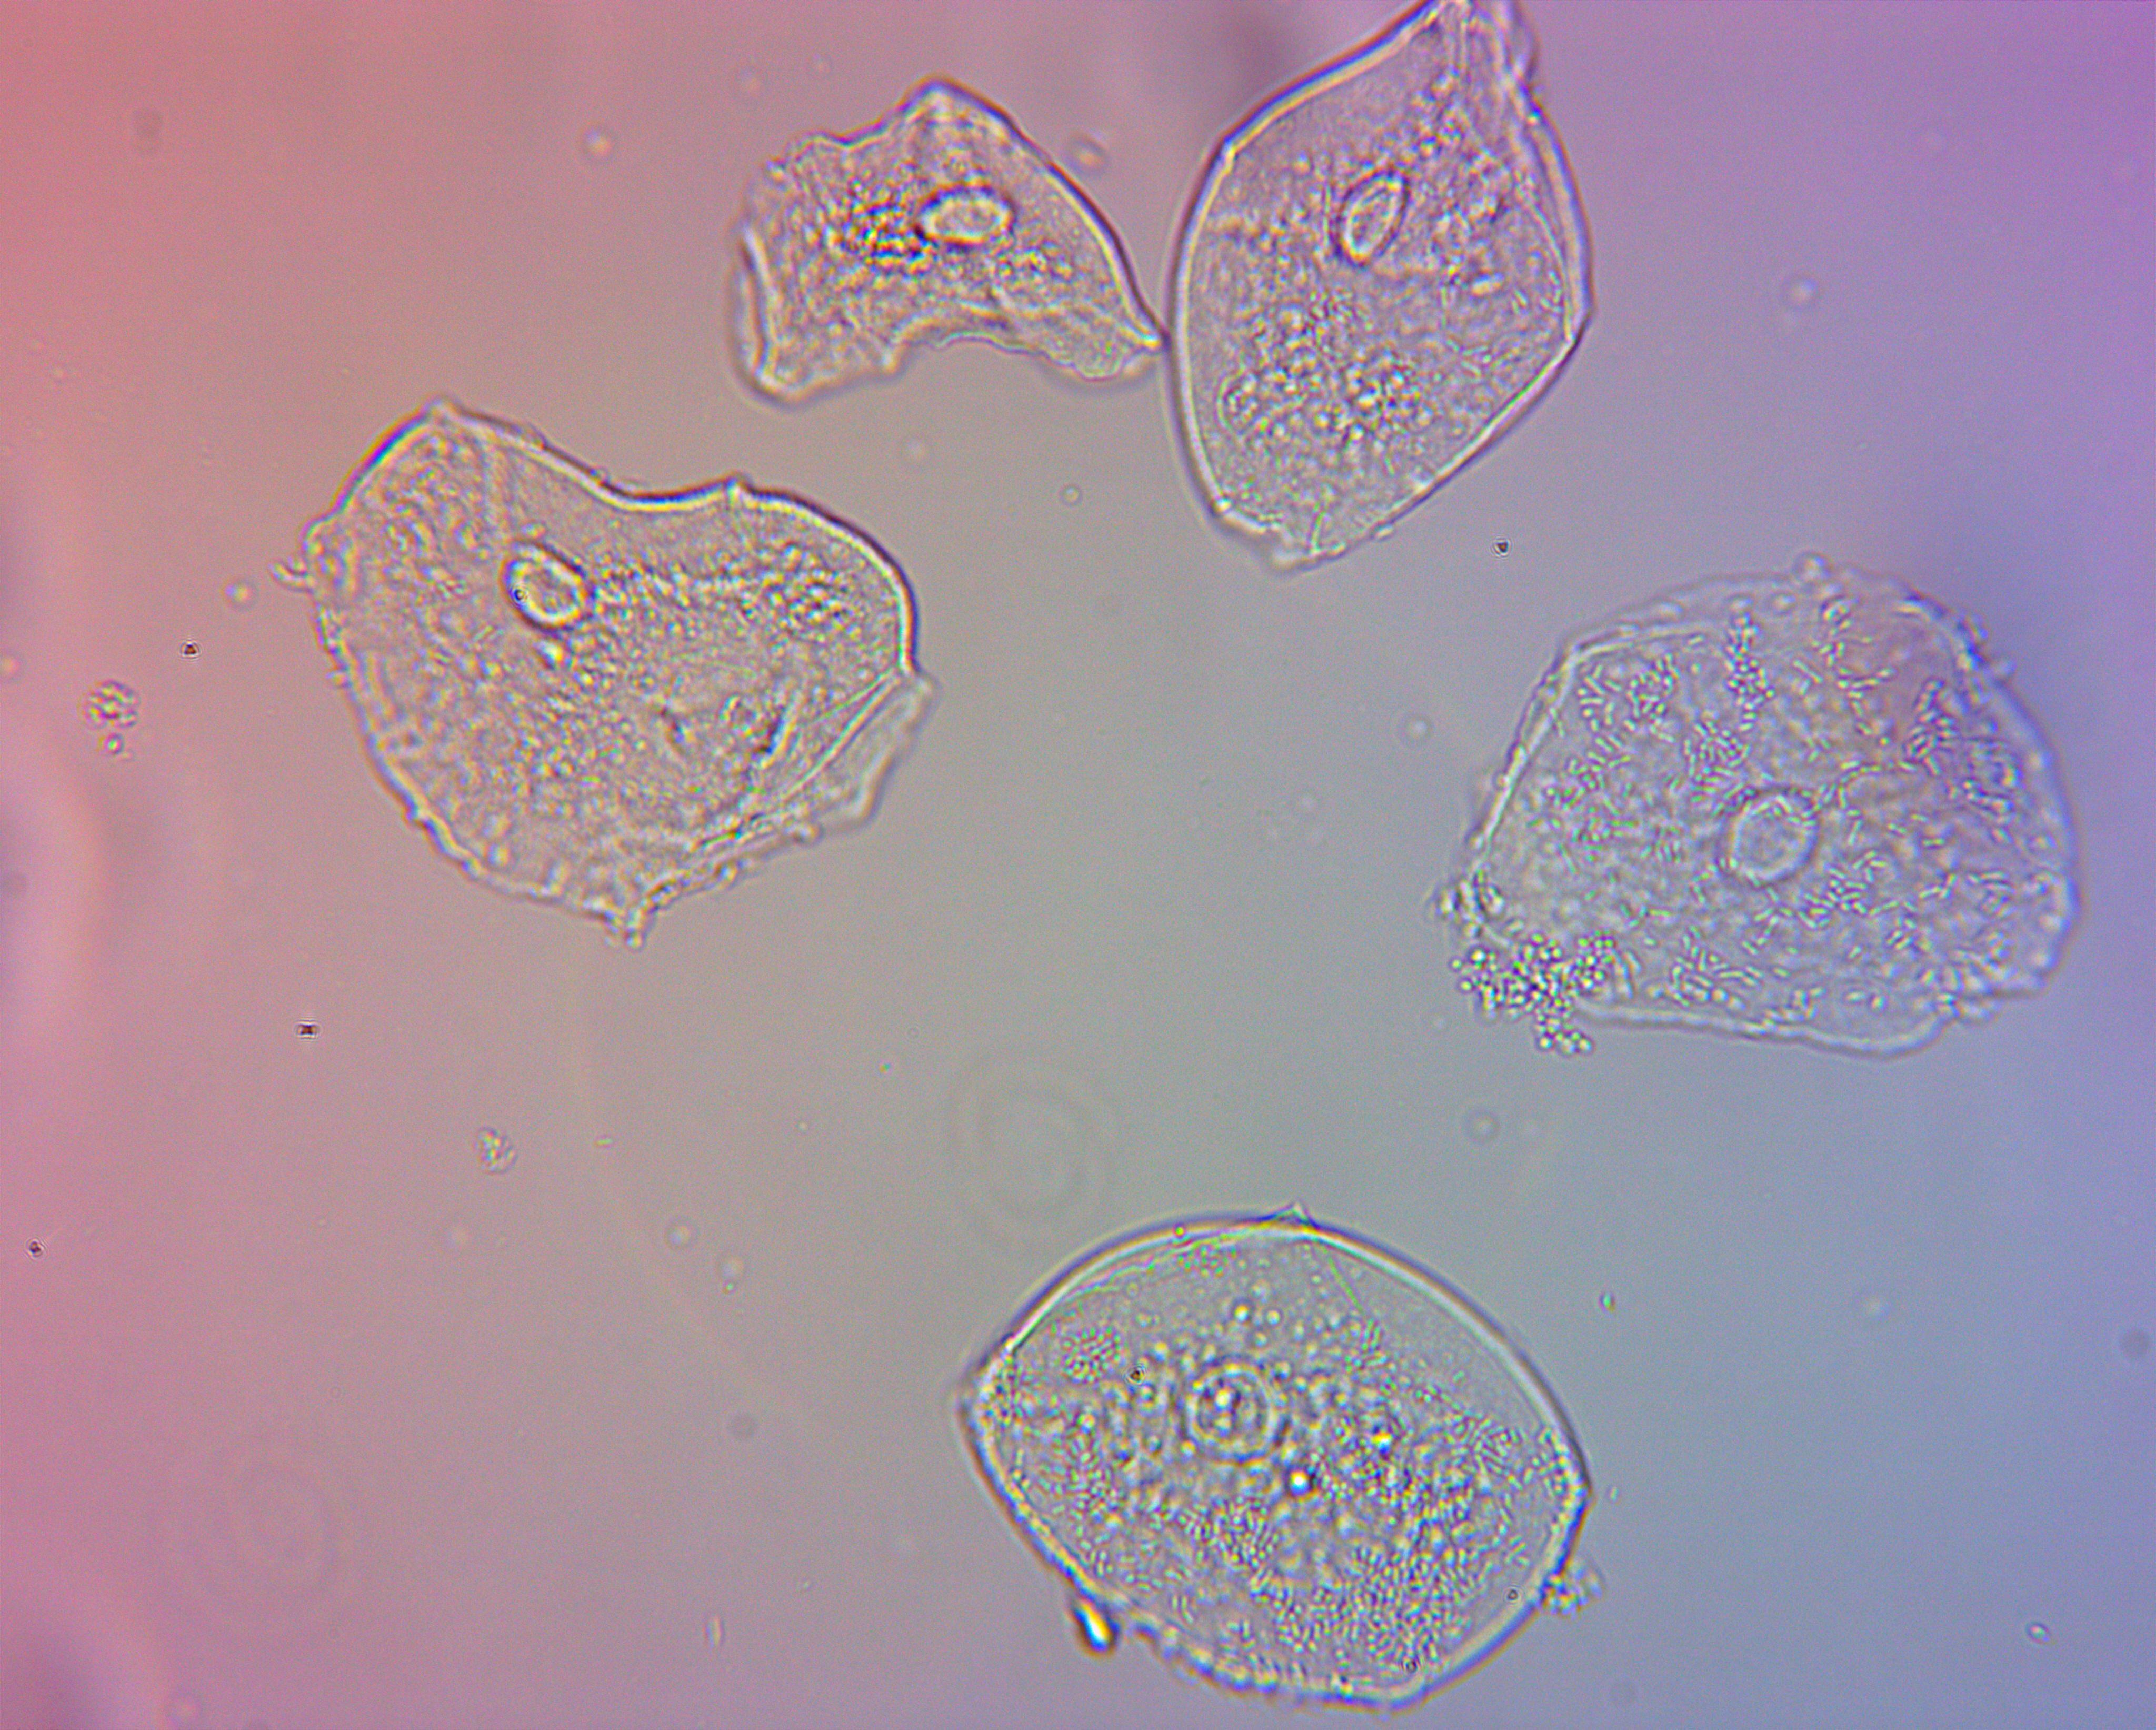 Human cheek cells viewed through an OMAX achromatic 40X NA0.65 160/0.17 objective lit through an OMAX dry brightfield Abbe NA1.25 condenser captured by an OMAX 14.0MP USB3.0 camera with 0.5X adapter